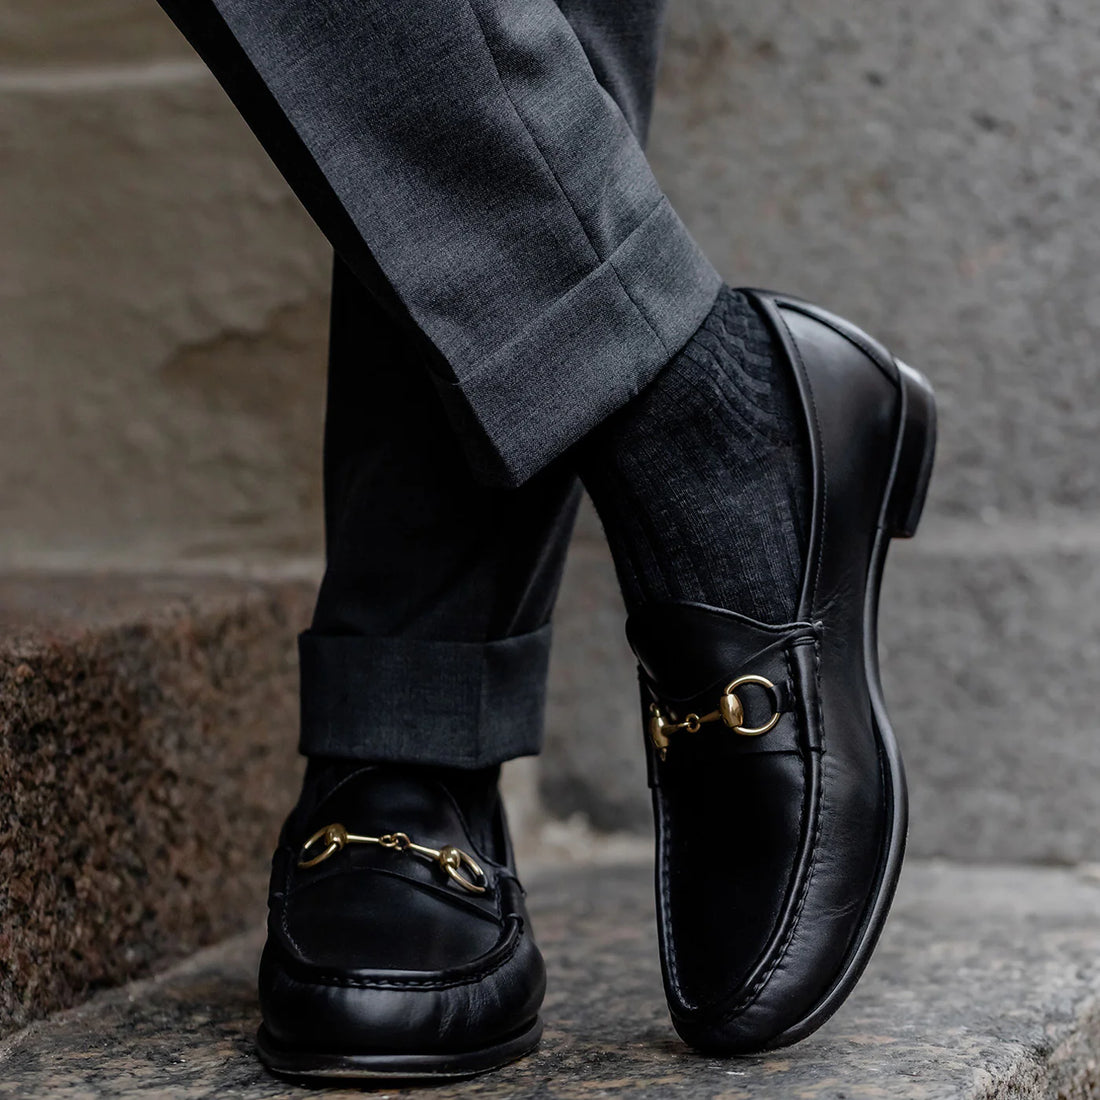 Close-up of a person's feet wearing black loafers with gold accents and grey trousers on a stone step.